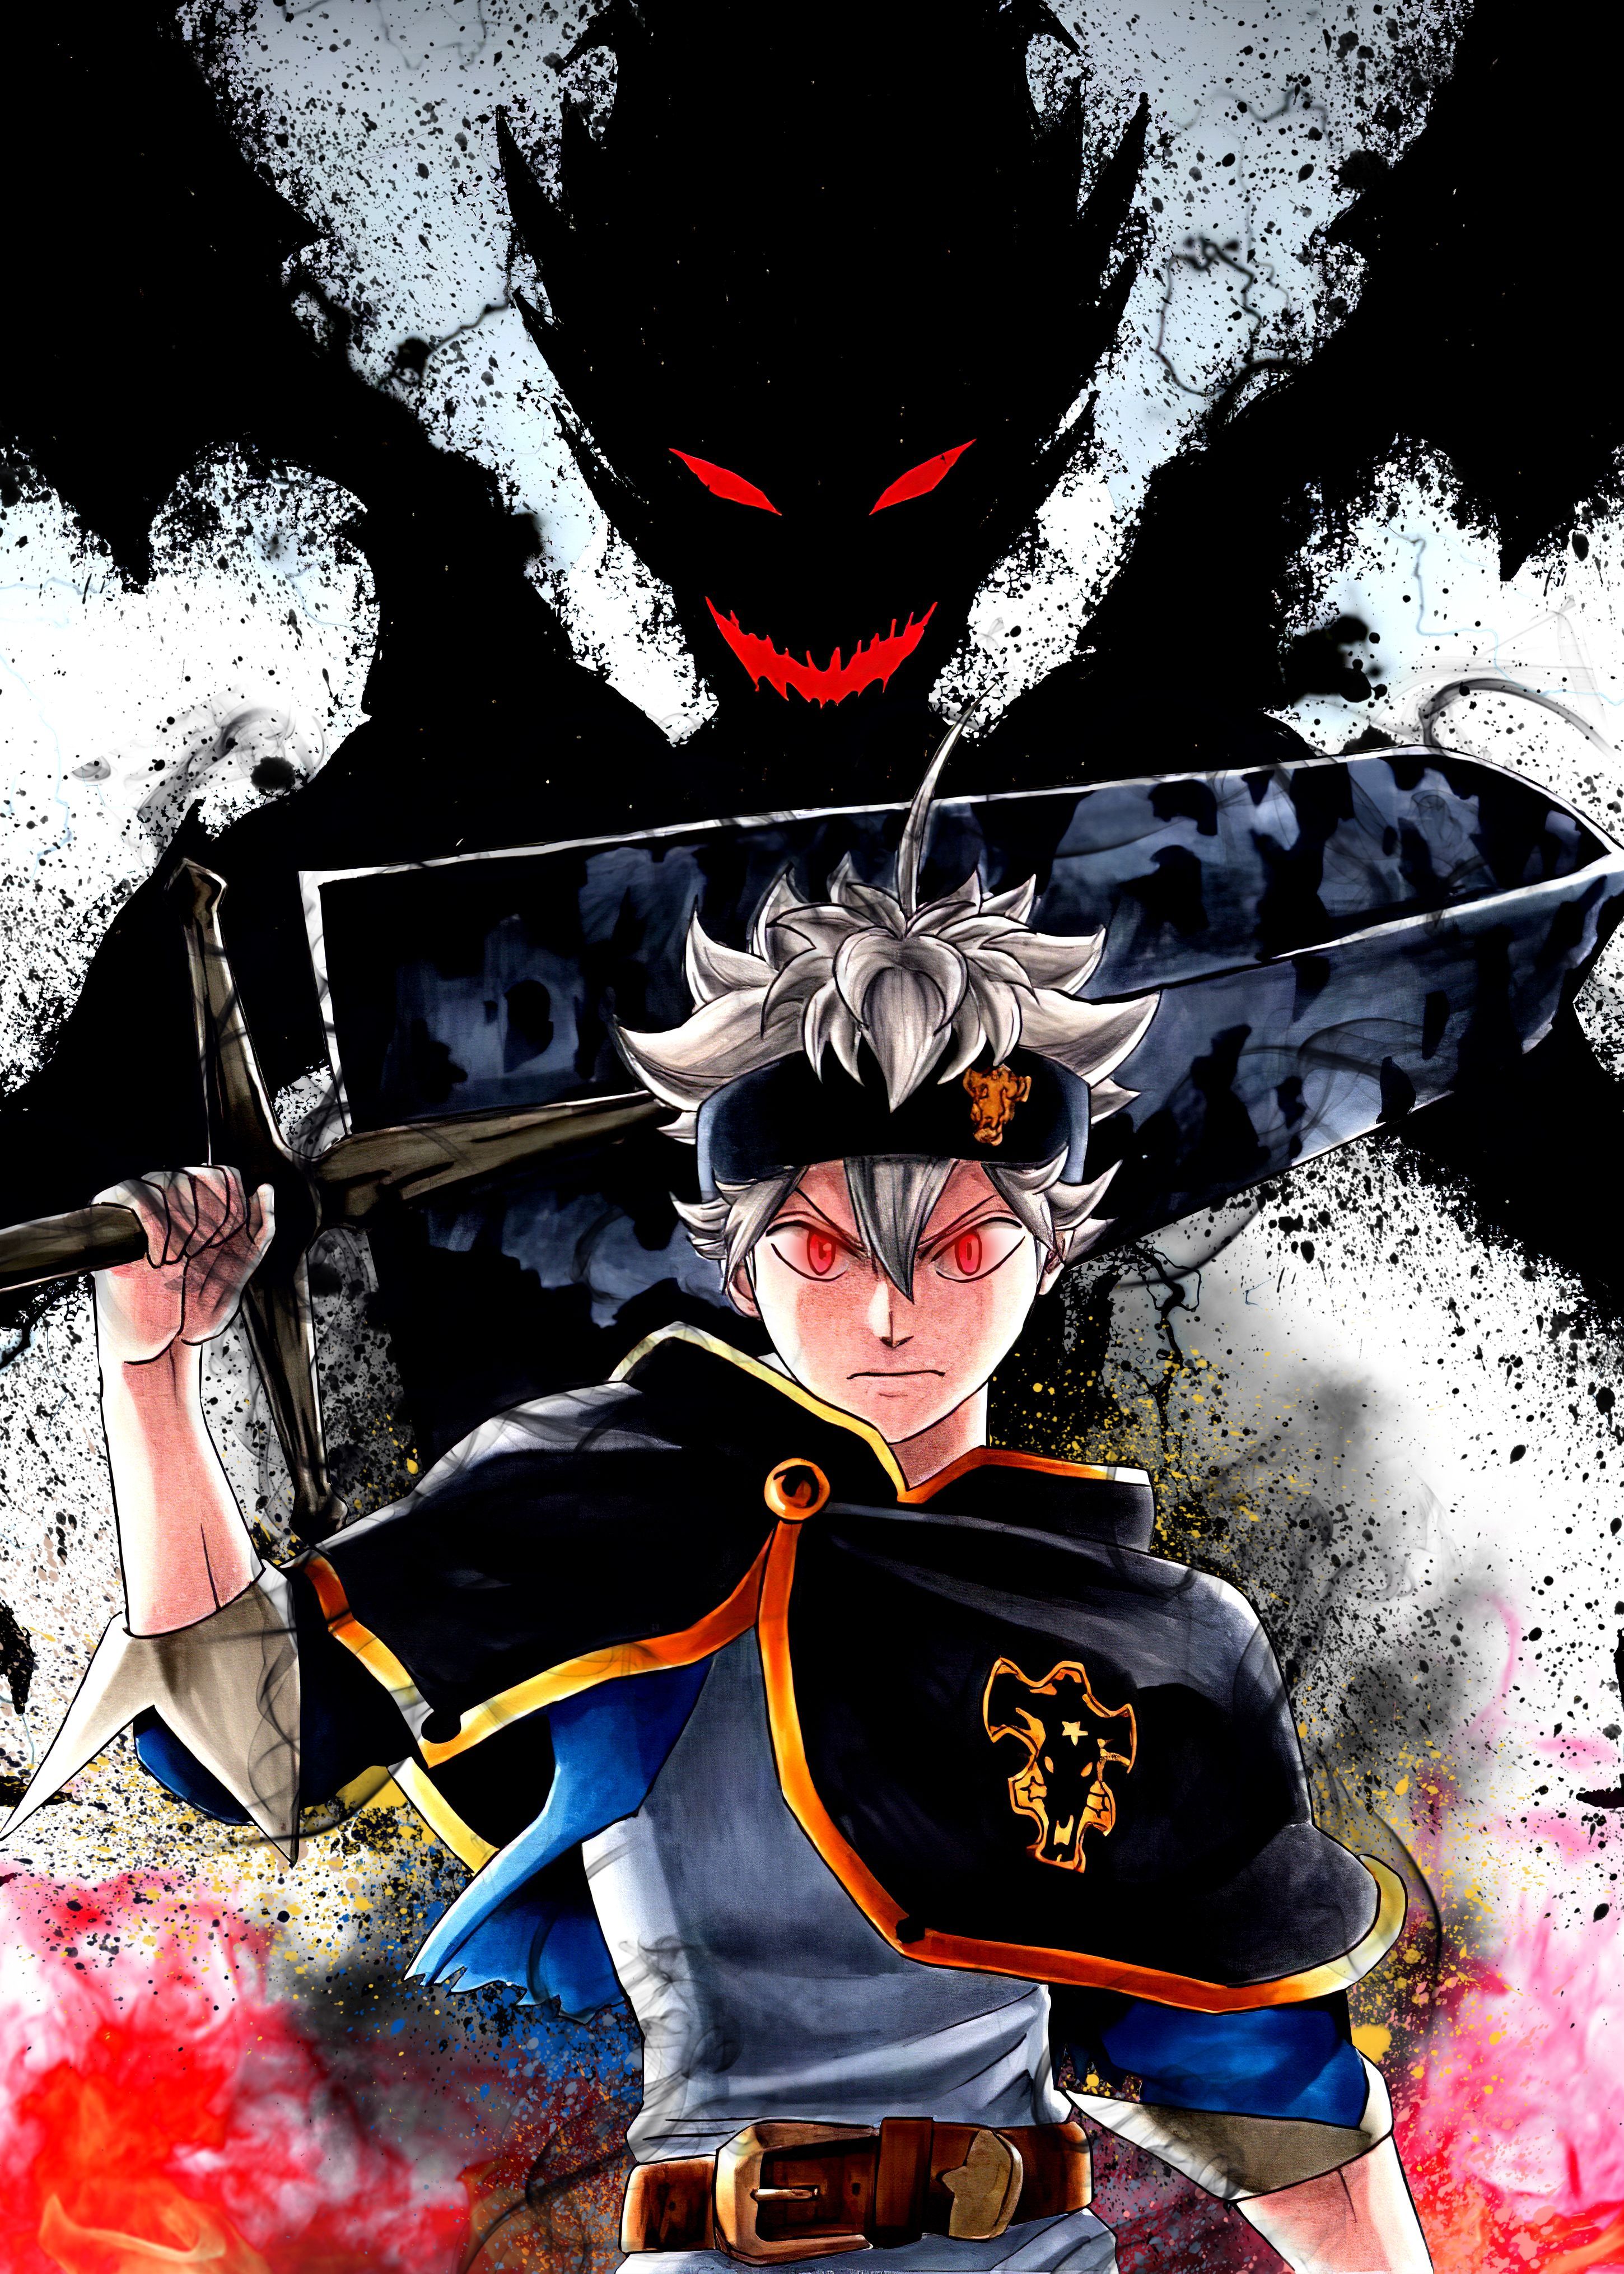 Black Clover Poster Wallpapers - Wallpaper Cave